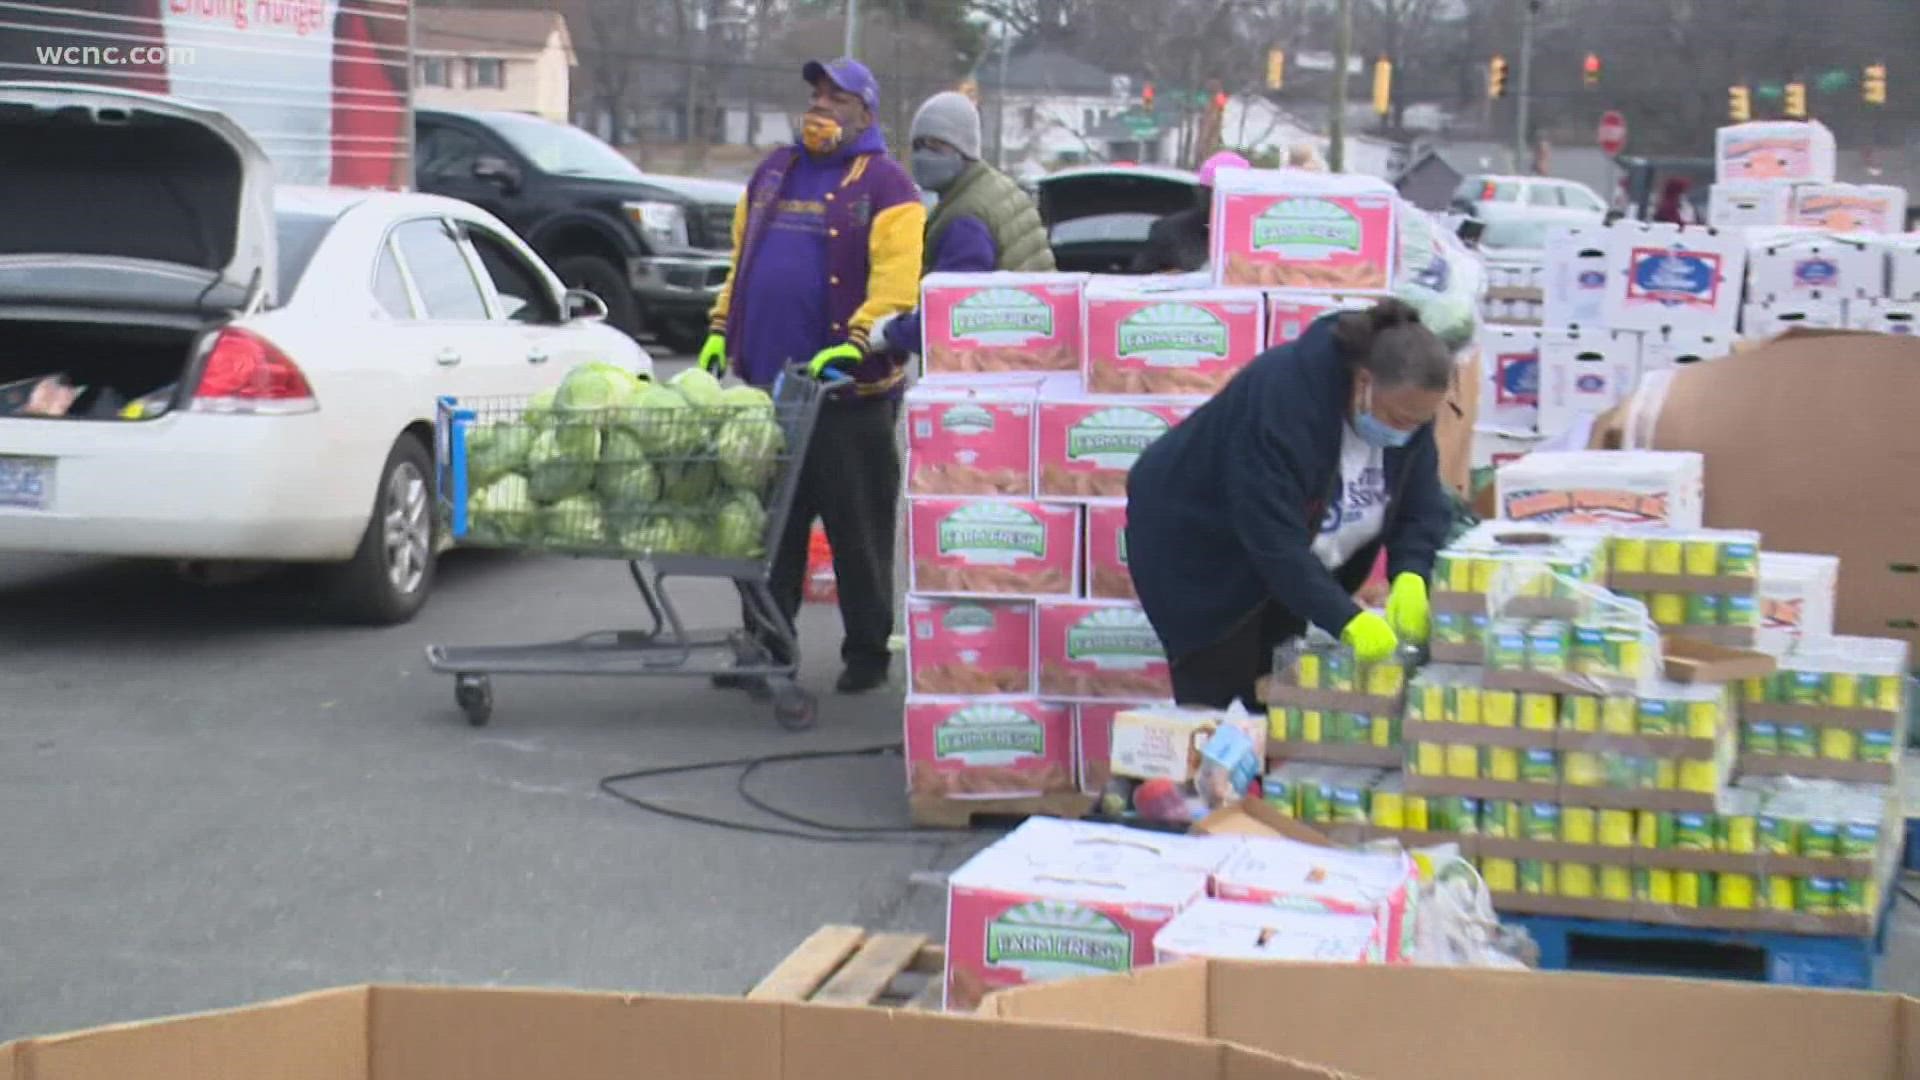 The food pantry has now served more than 300,000 people since the pandemic started.